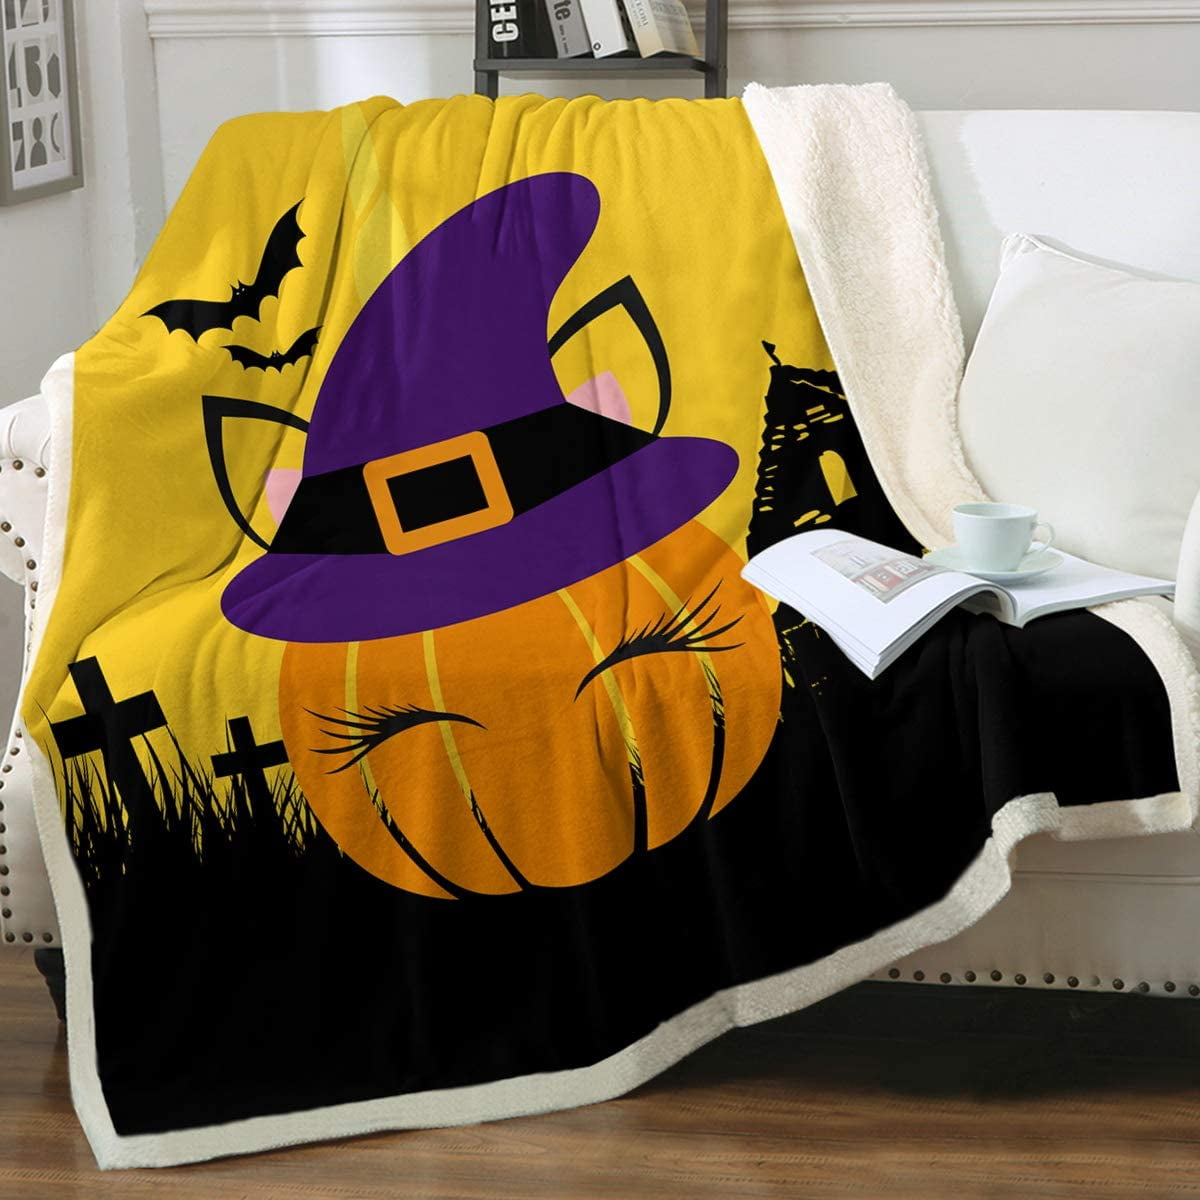 Halloween Pumpkin Black Cat Lightweight Fleece Blanket Microfiber Soft Flannel Decor Witch Hat Skull Throw Fuzzy Blanket for Bed Couch Car Camping Ultra Luxurious Warm Cozy All Seasons 50x60 Inches